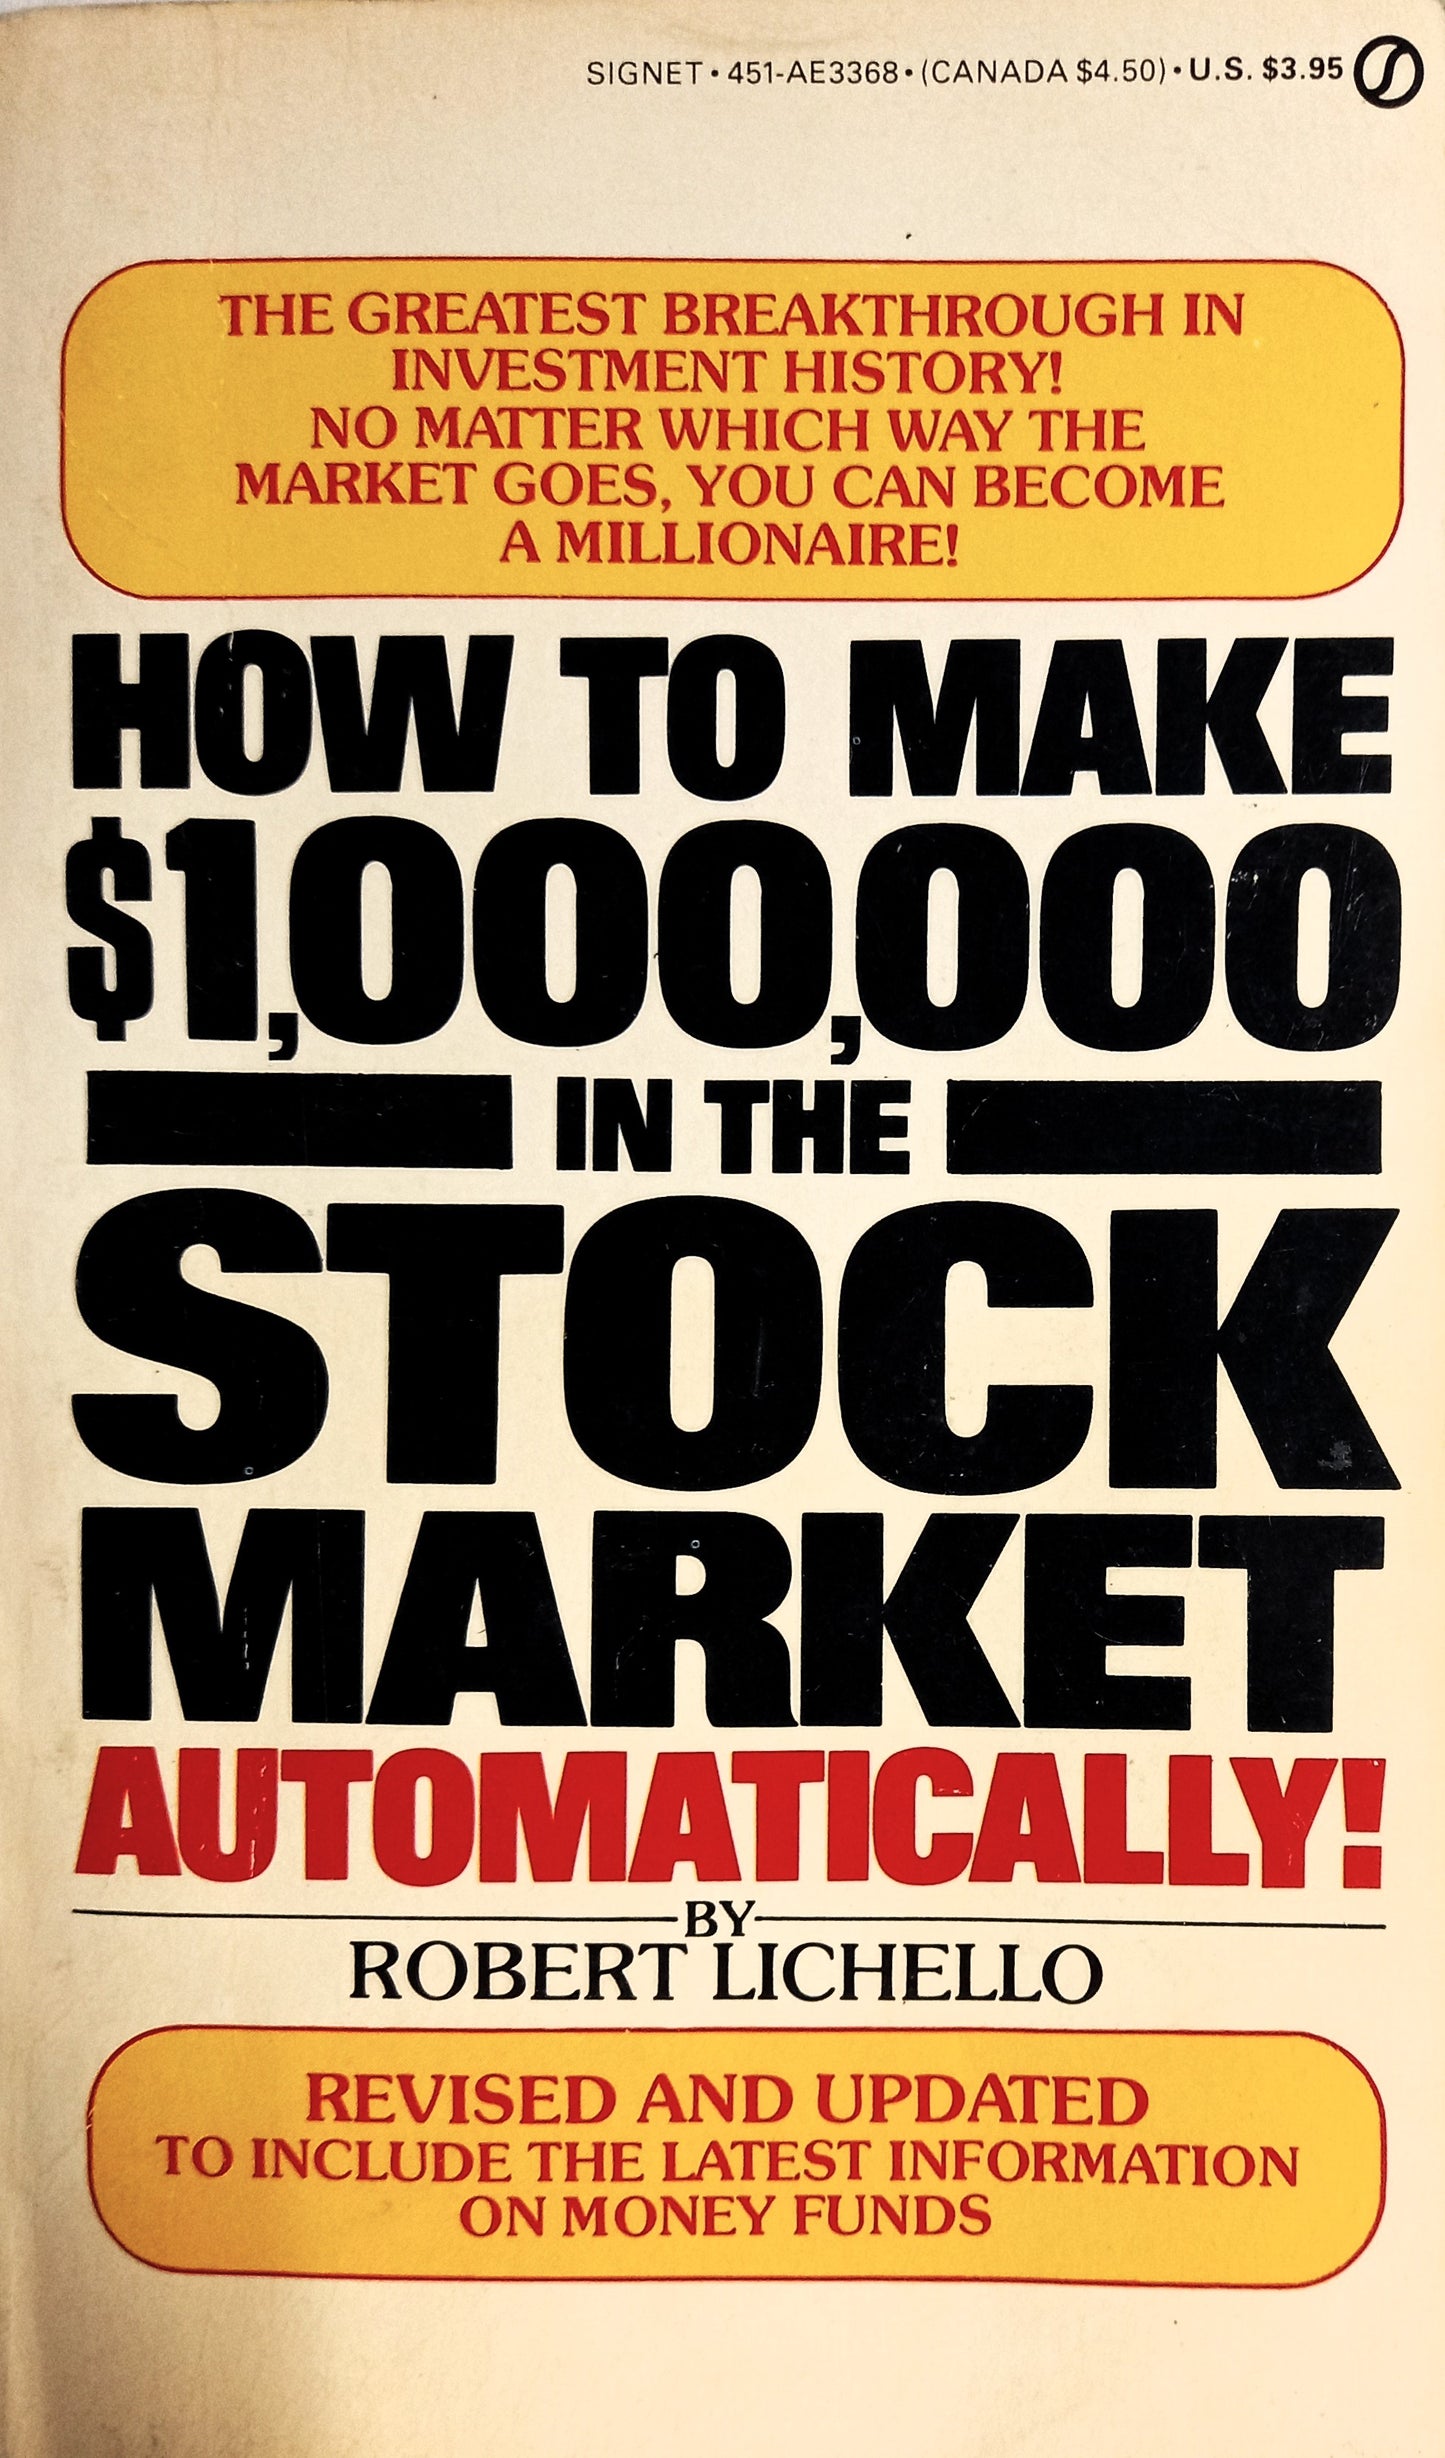 How to Make $1,000,000 Dollars in the Stock Market Automatically!